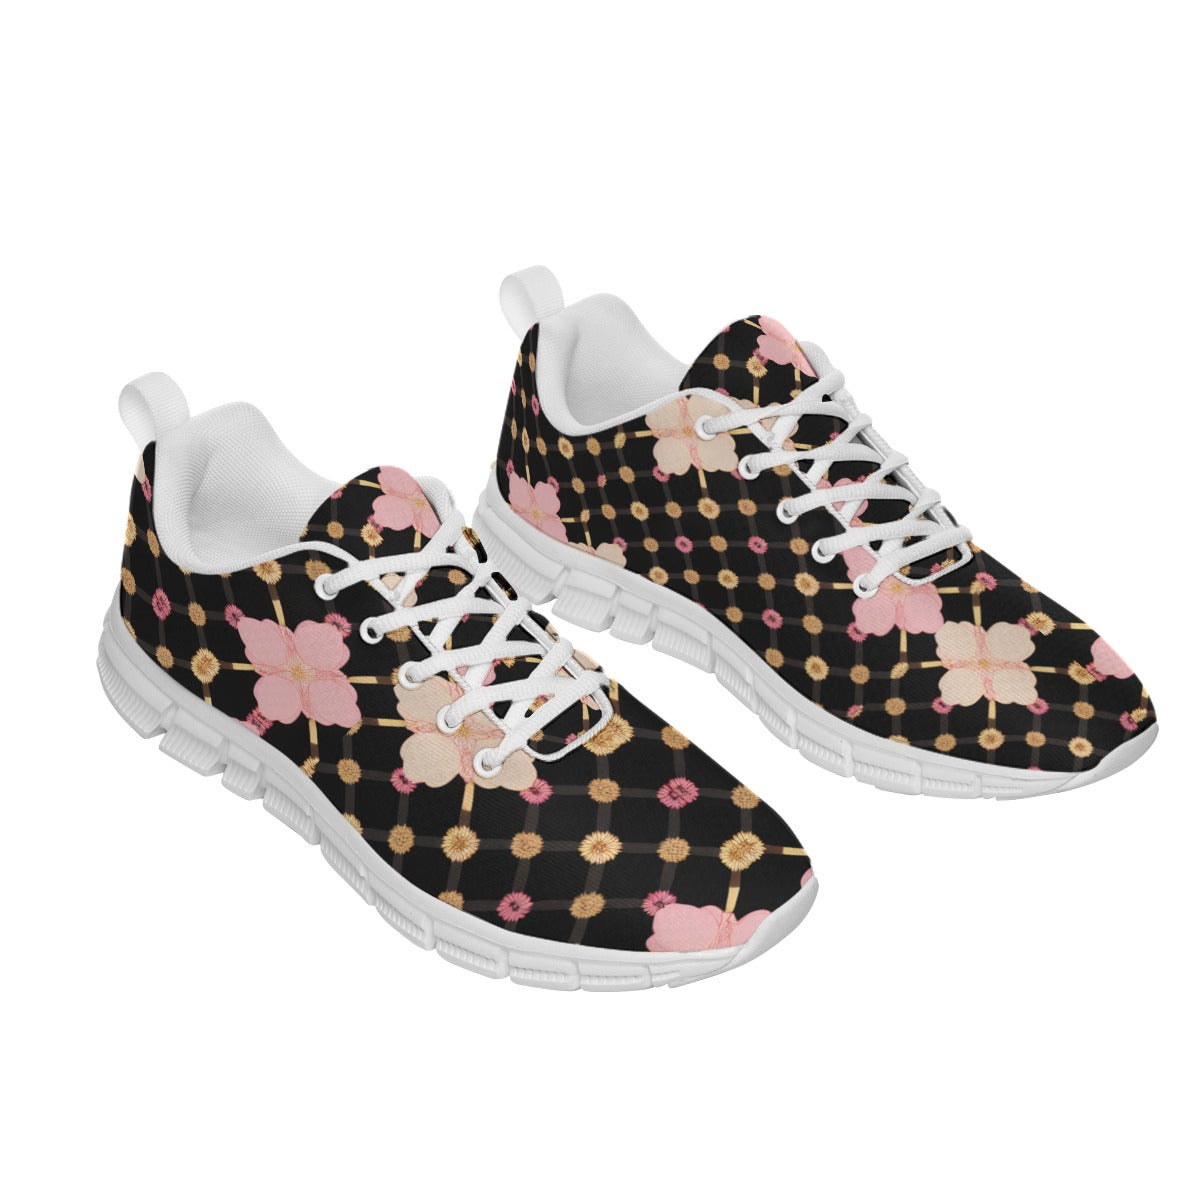 AC KAMI Women's Sports Shoes With White Sole